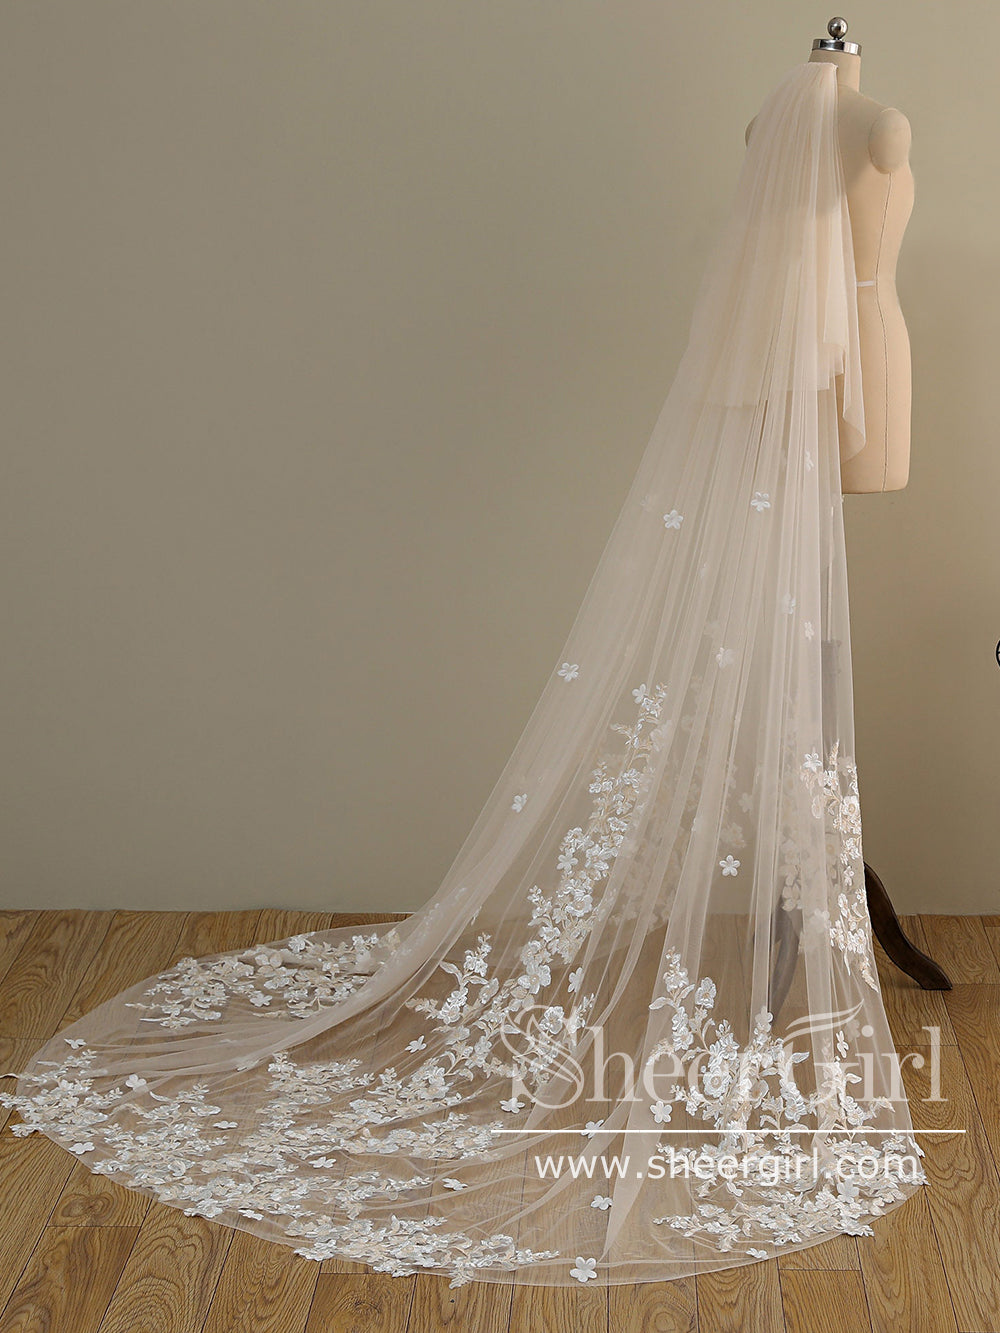 http://www.sheergirl.com/cdn/shop/products/Ombre-Champagne-Floral-Lace-Ivory-Cathedral-Veil-with-Blusher-Bridal-Veil-Wedding-Veil-ACC1193_1000x.jpg?v=1680608257